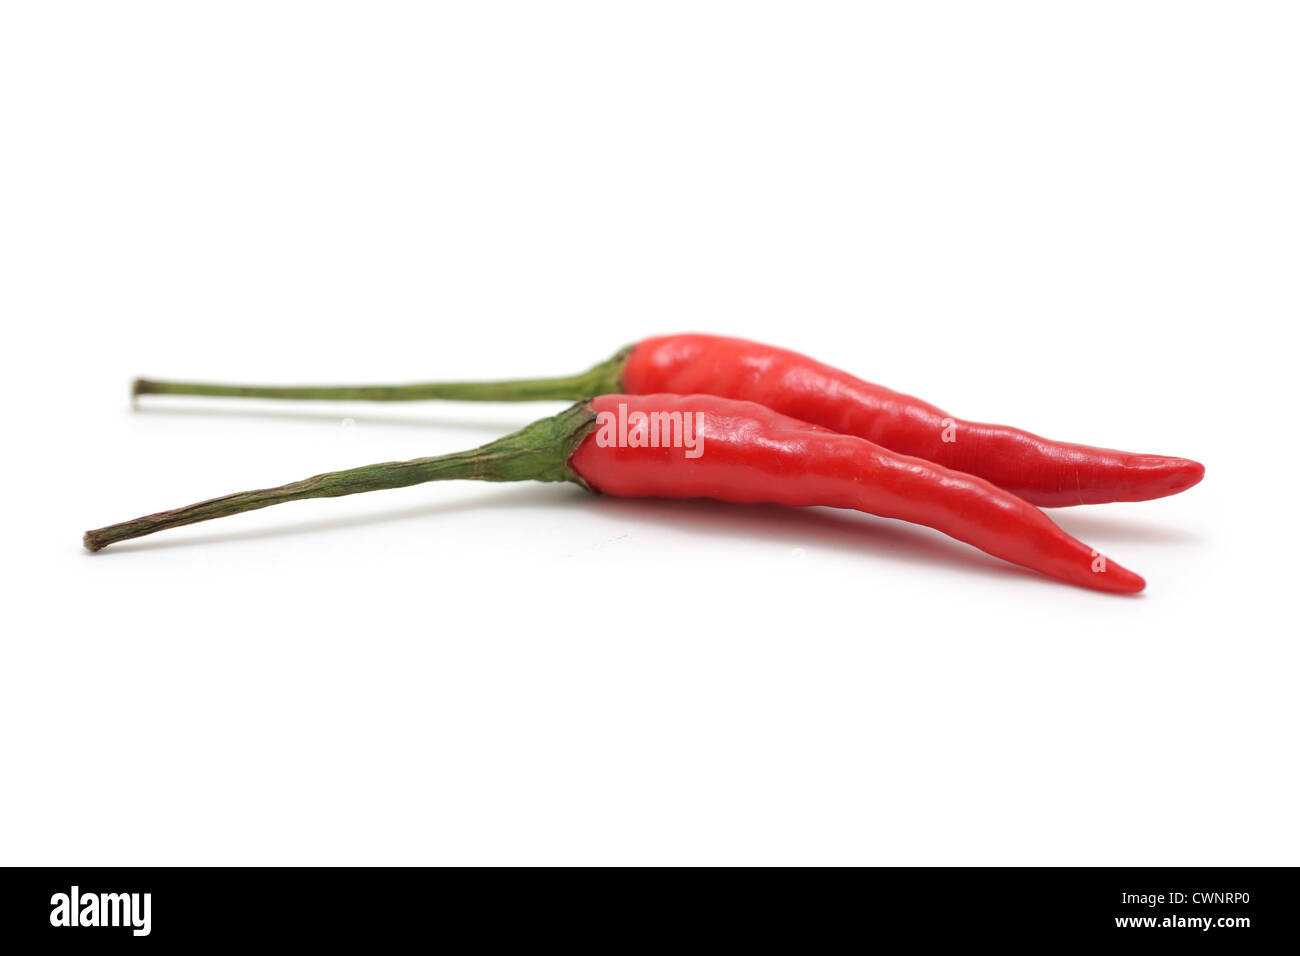 Red Chili Peppers, Hot Thai Chilis Stock Photo